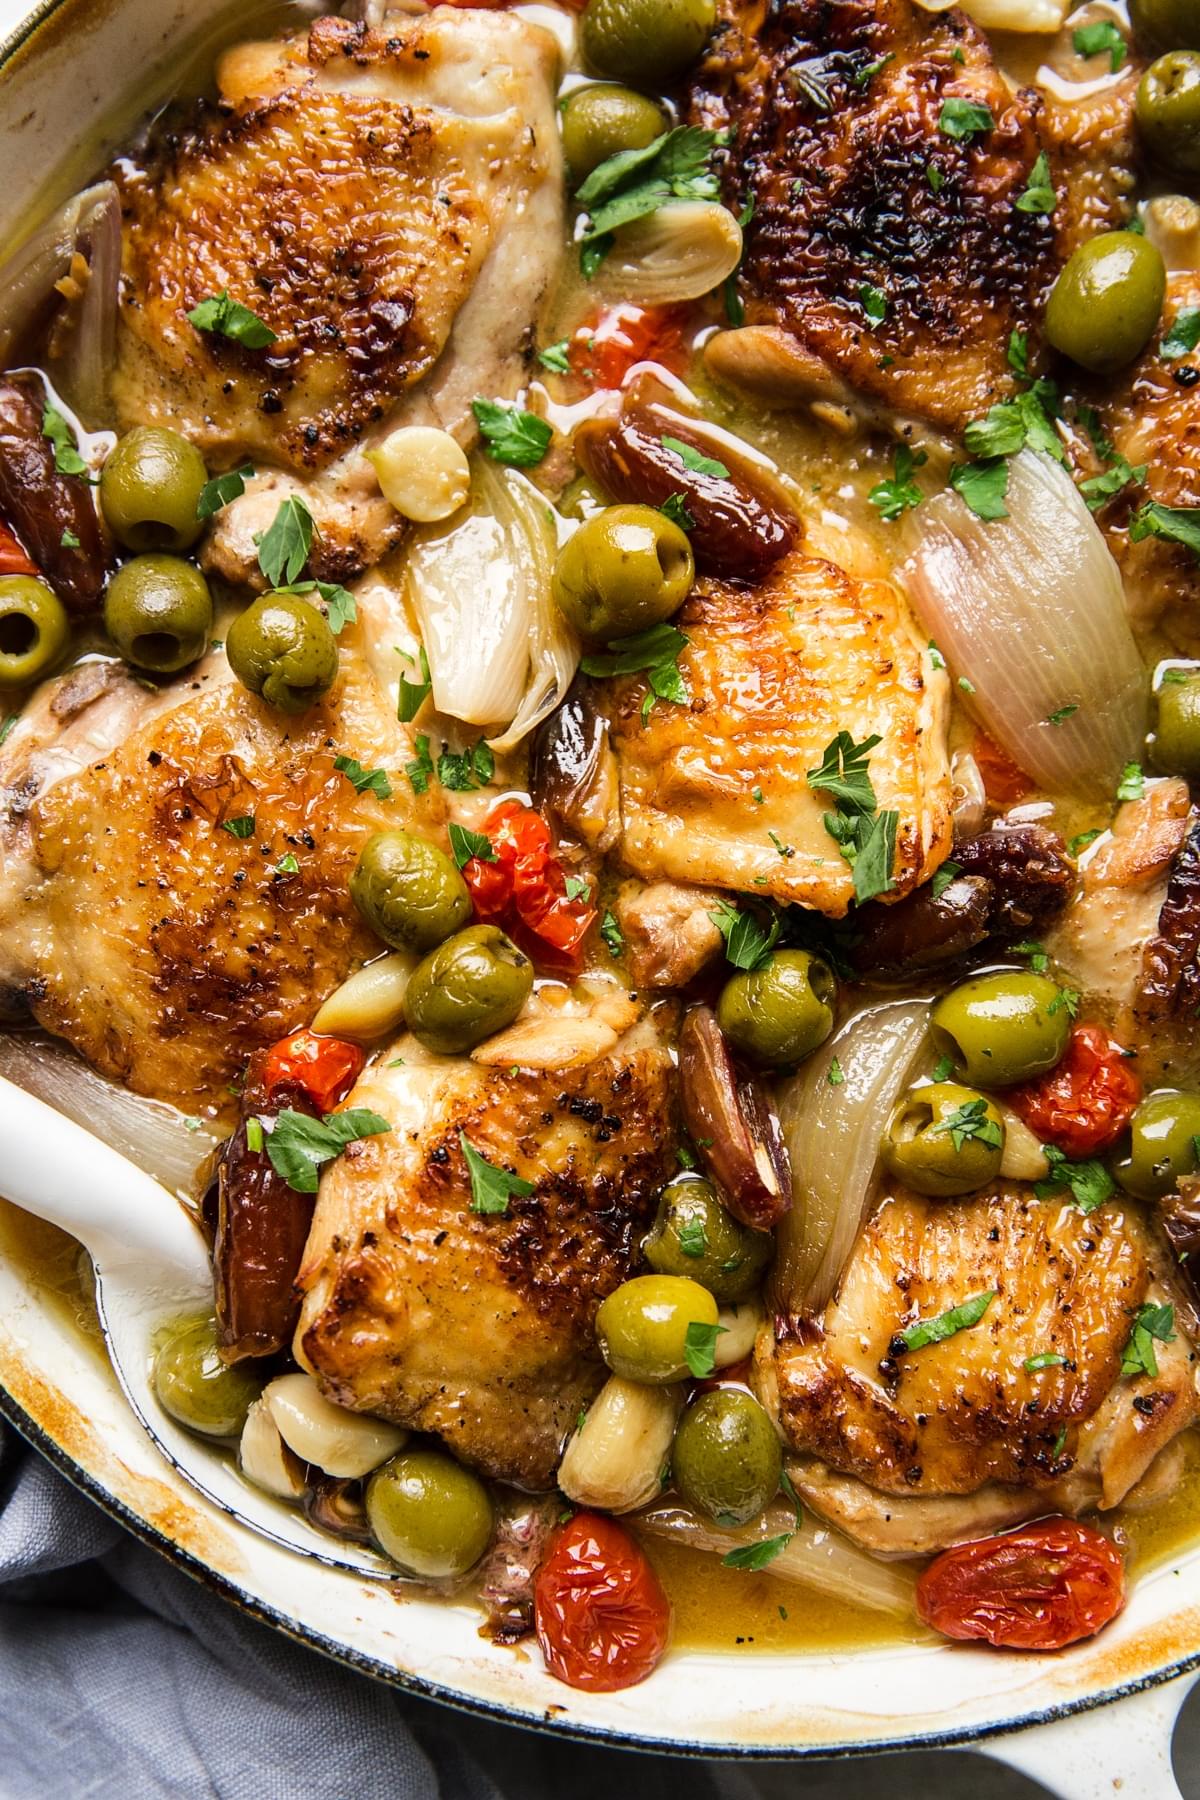 Provençal chicken with olives, tomatoes, shallots, and white wine